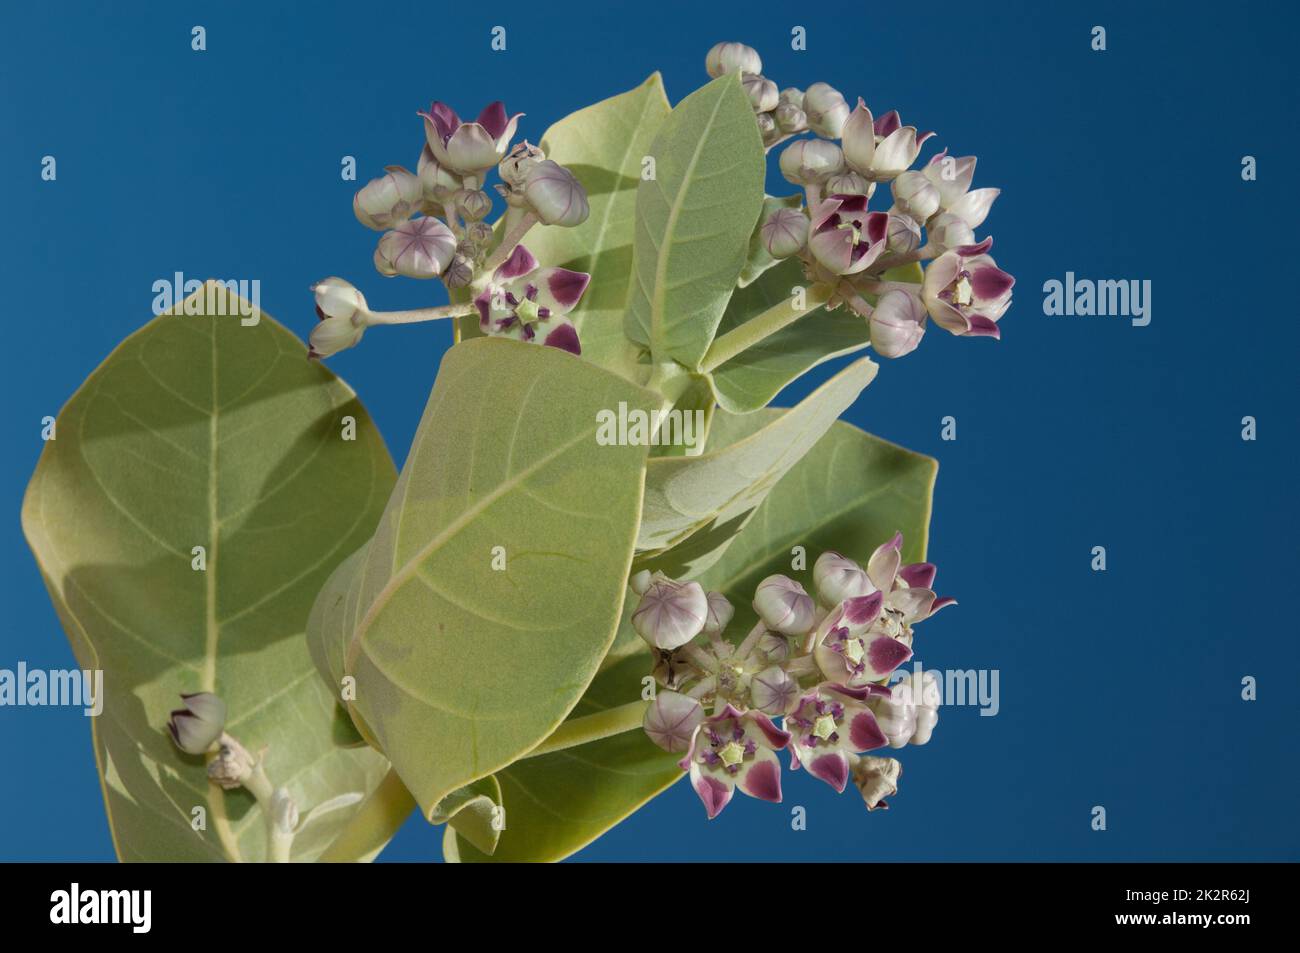 Flowers and leaves of Apple of Sodom. Stock Photo